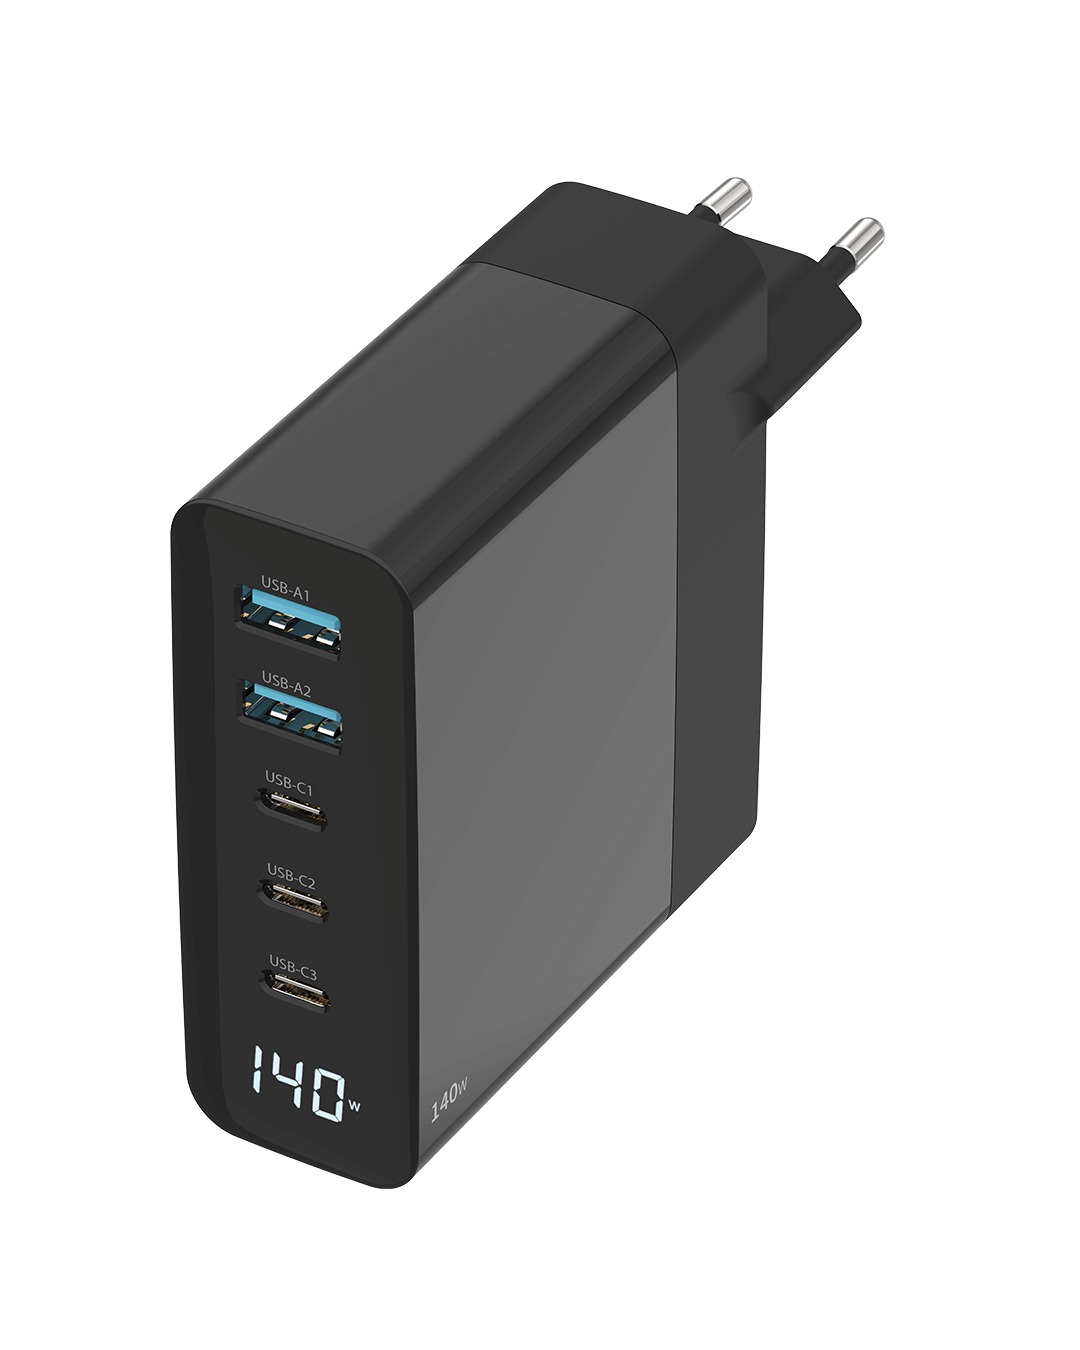 Sitecom 140W GaN Power Delivery Wall Charger with LED display